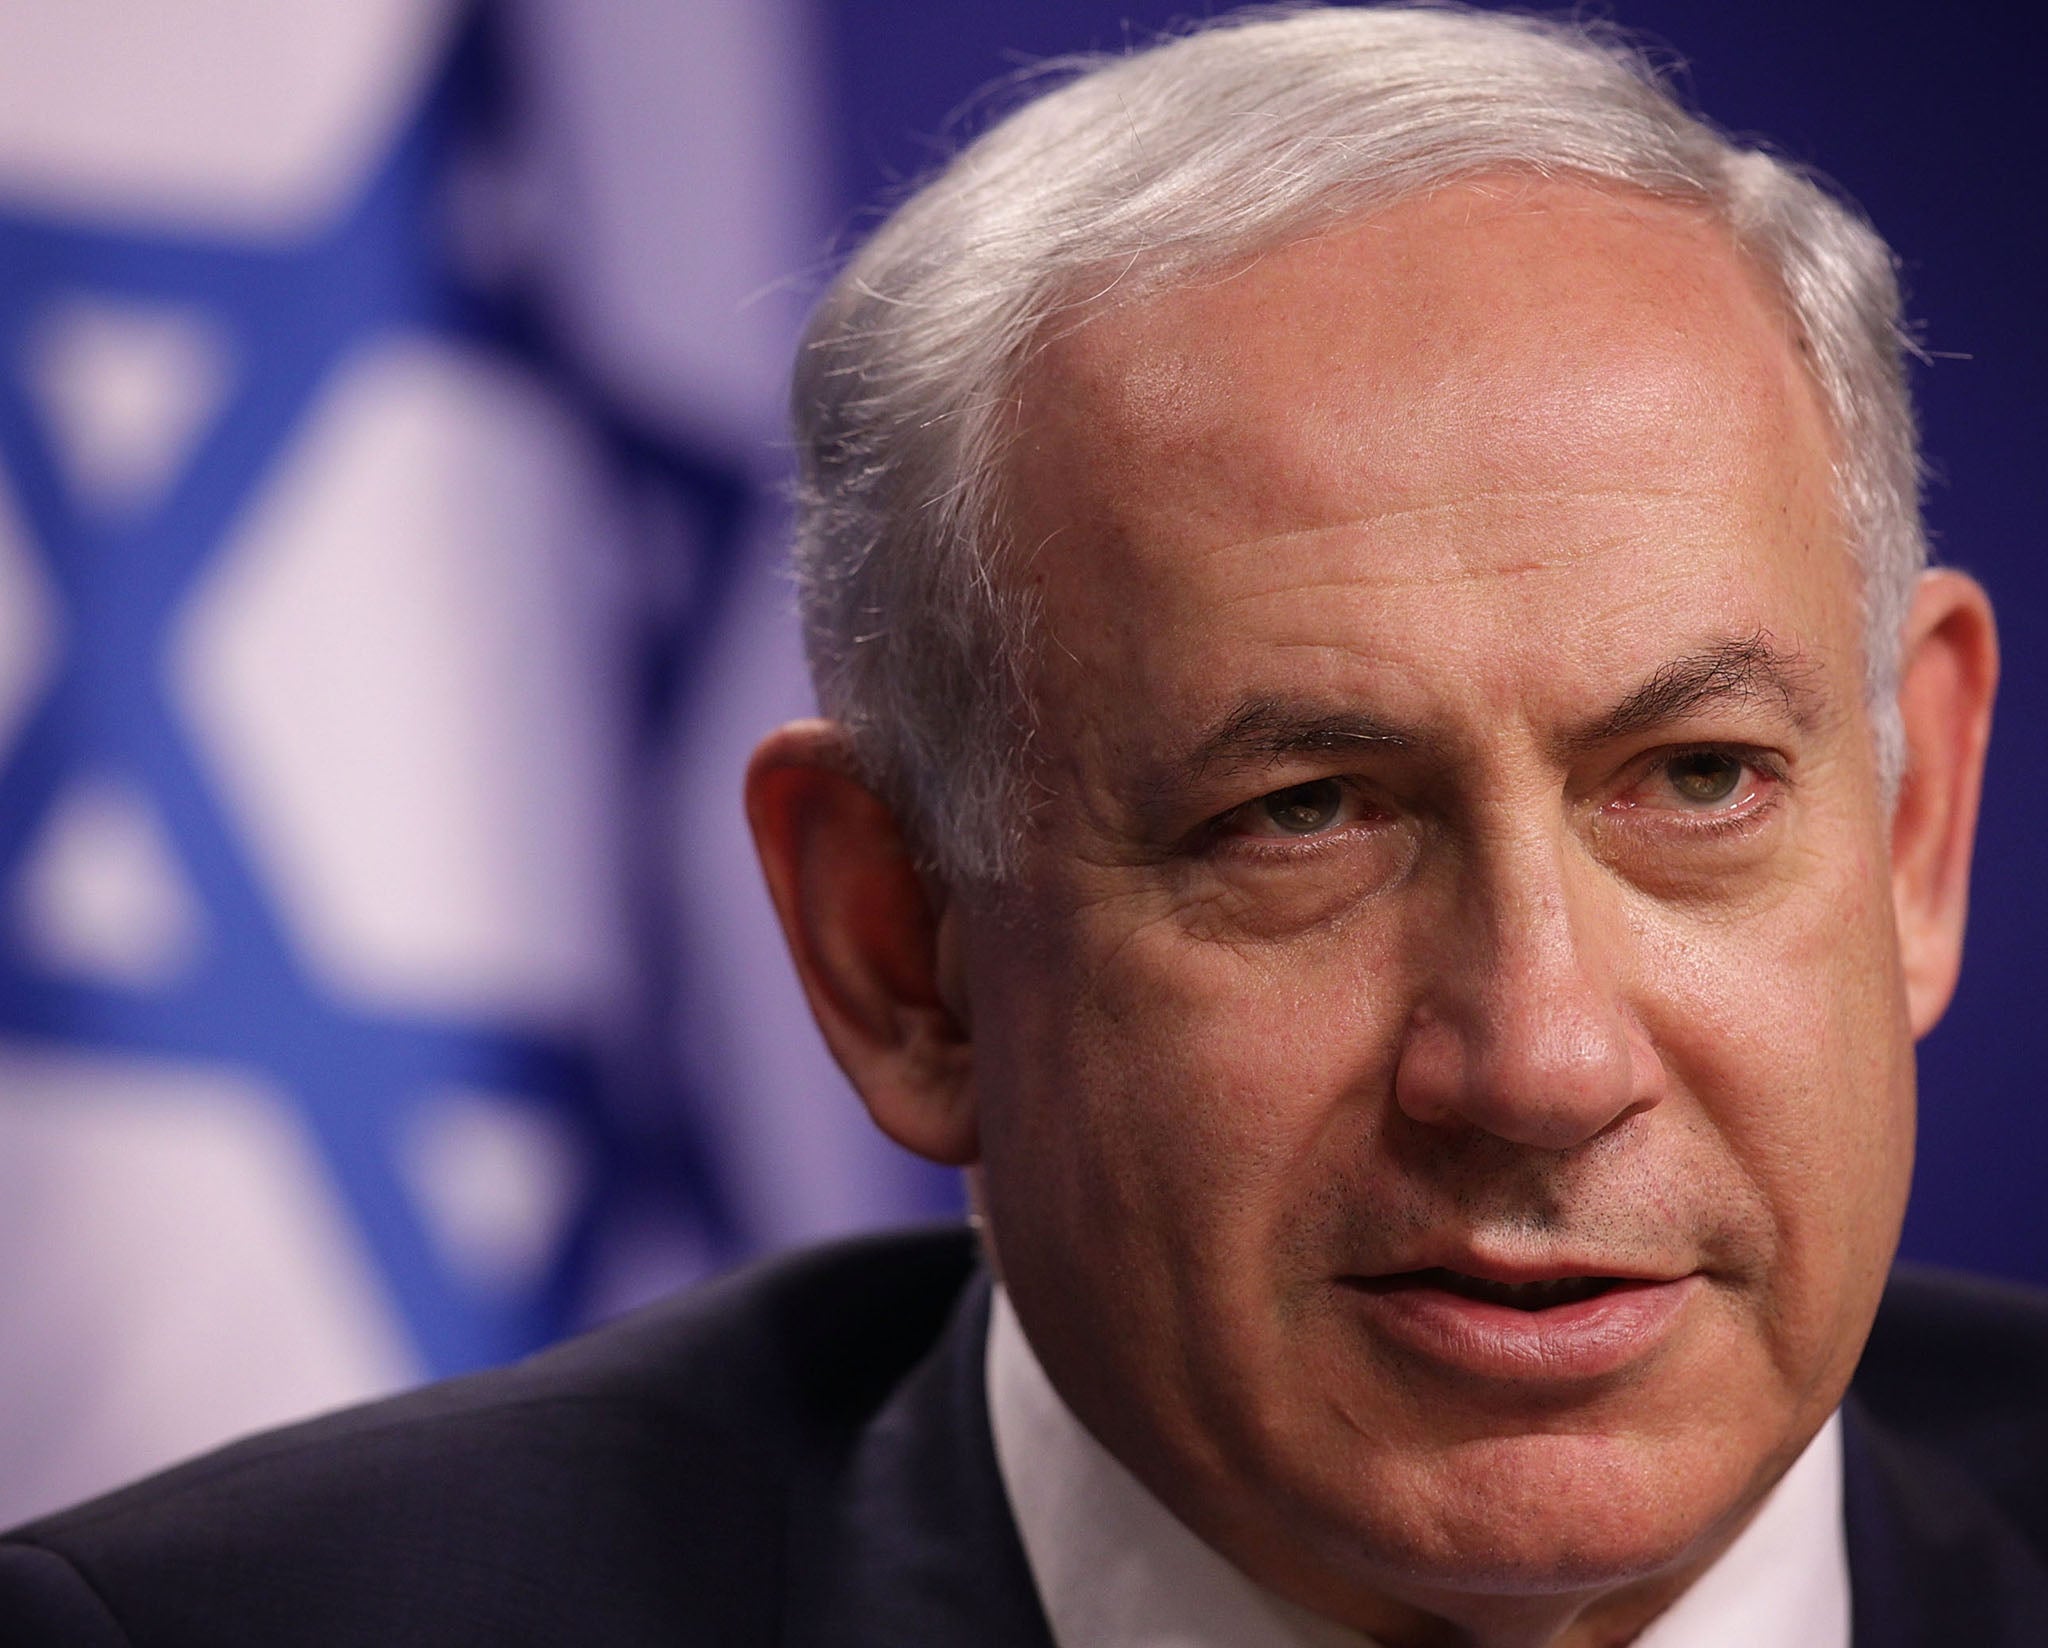 Israeli Prime Minister Benjamin Netanyahu was at the centre of the attempt to reach out to Jewish-American groups